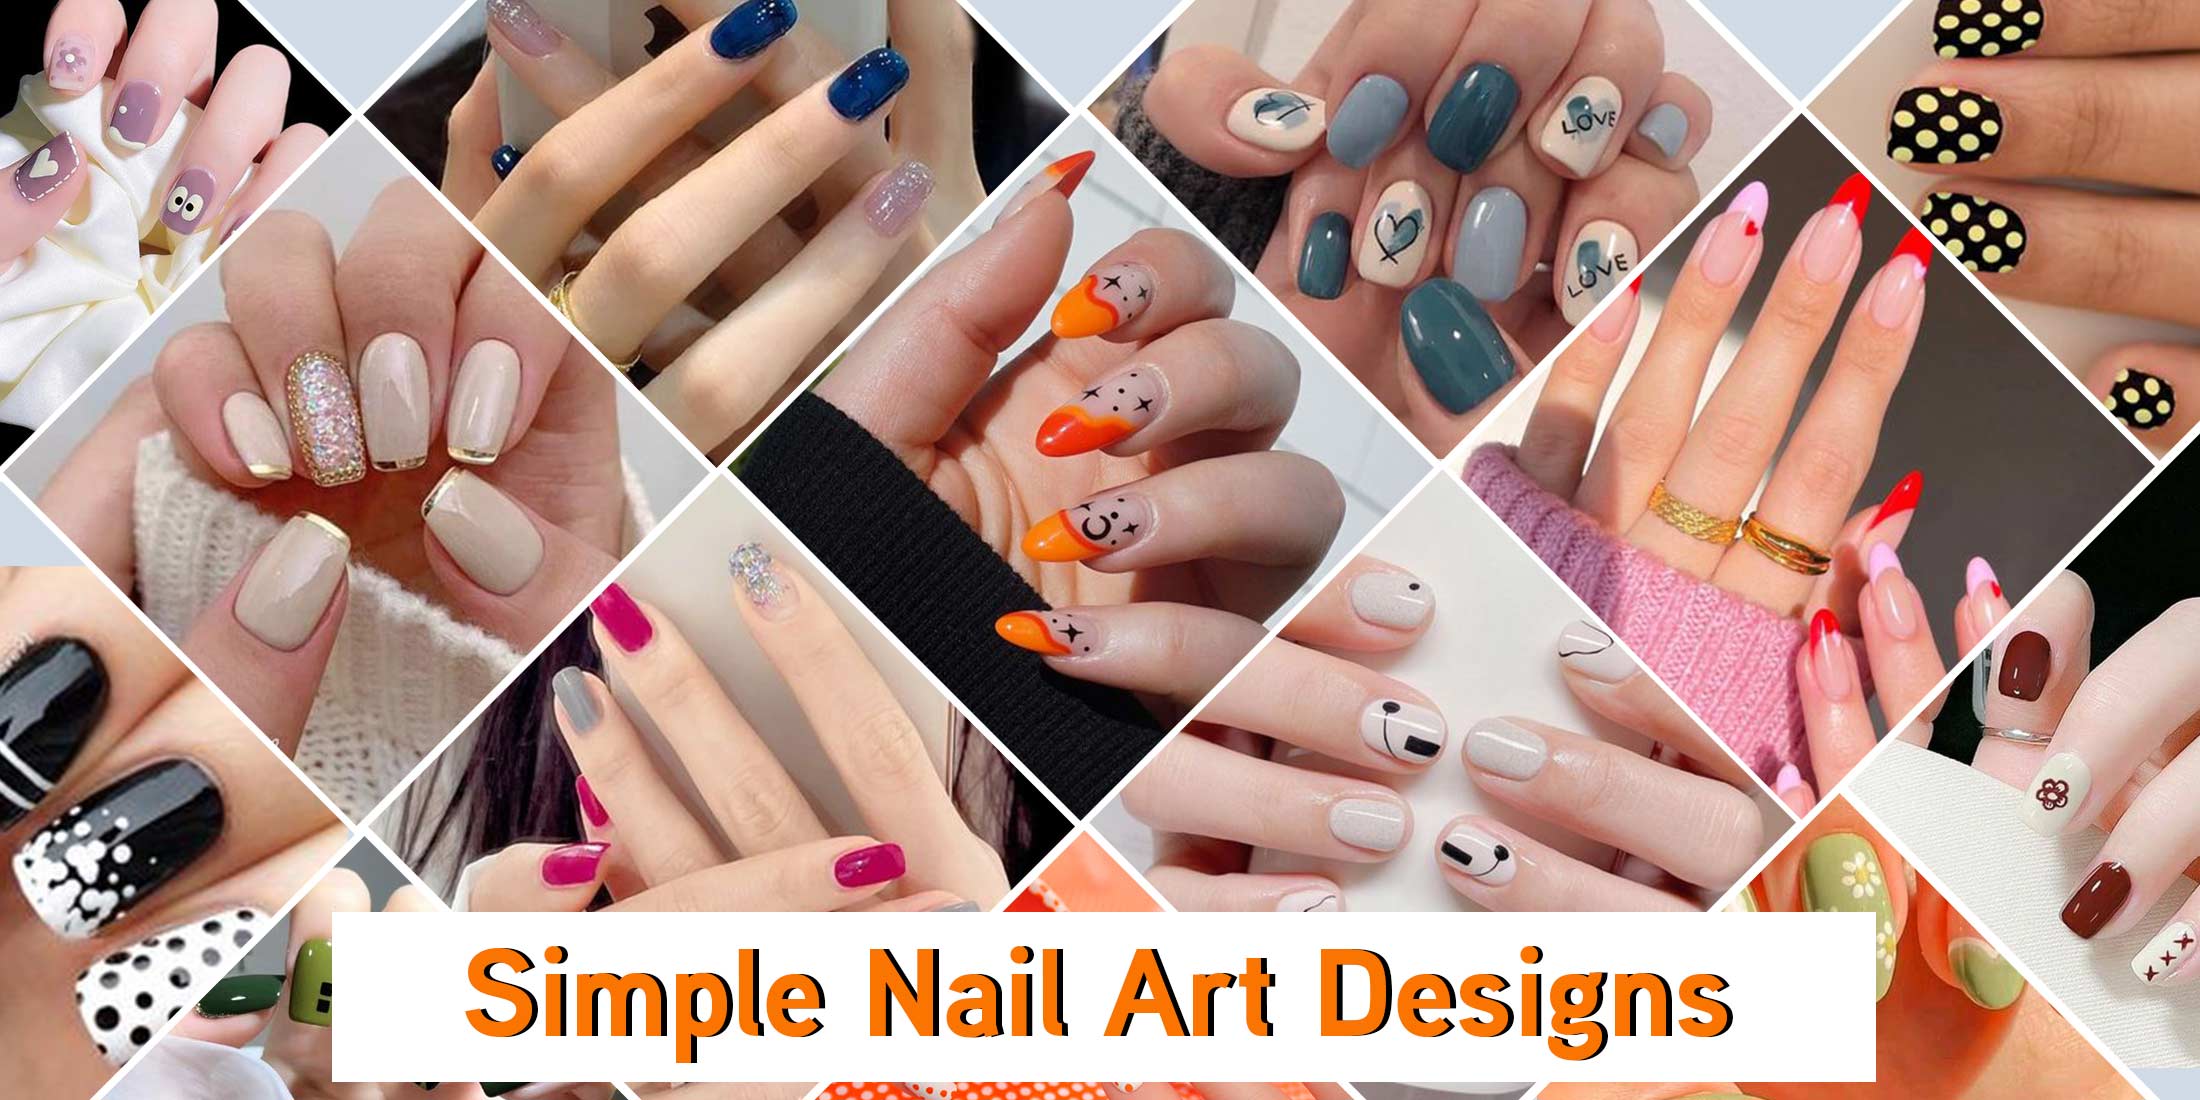 Details more than 115 nail art for diwali latest